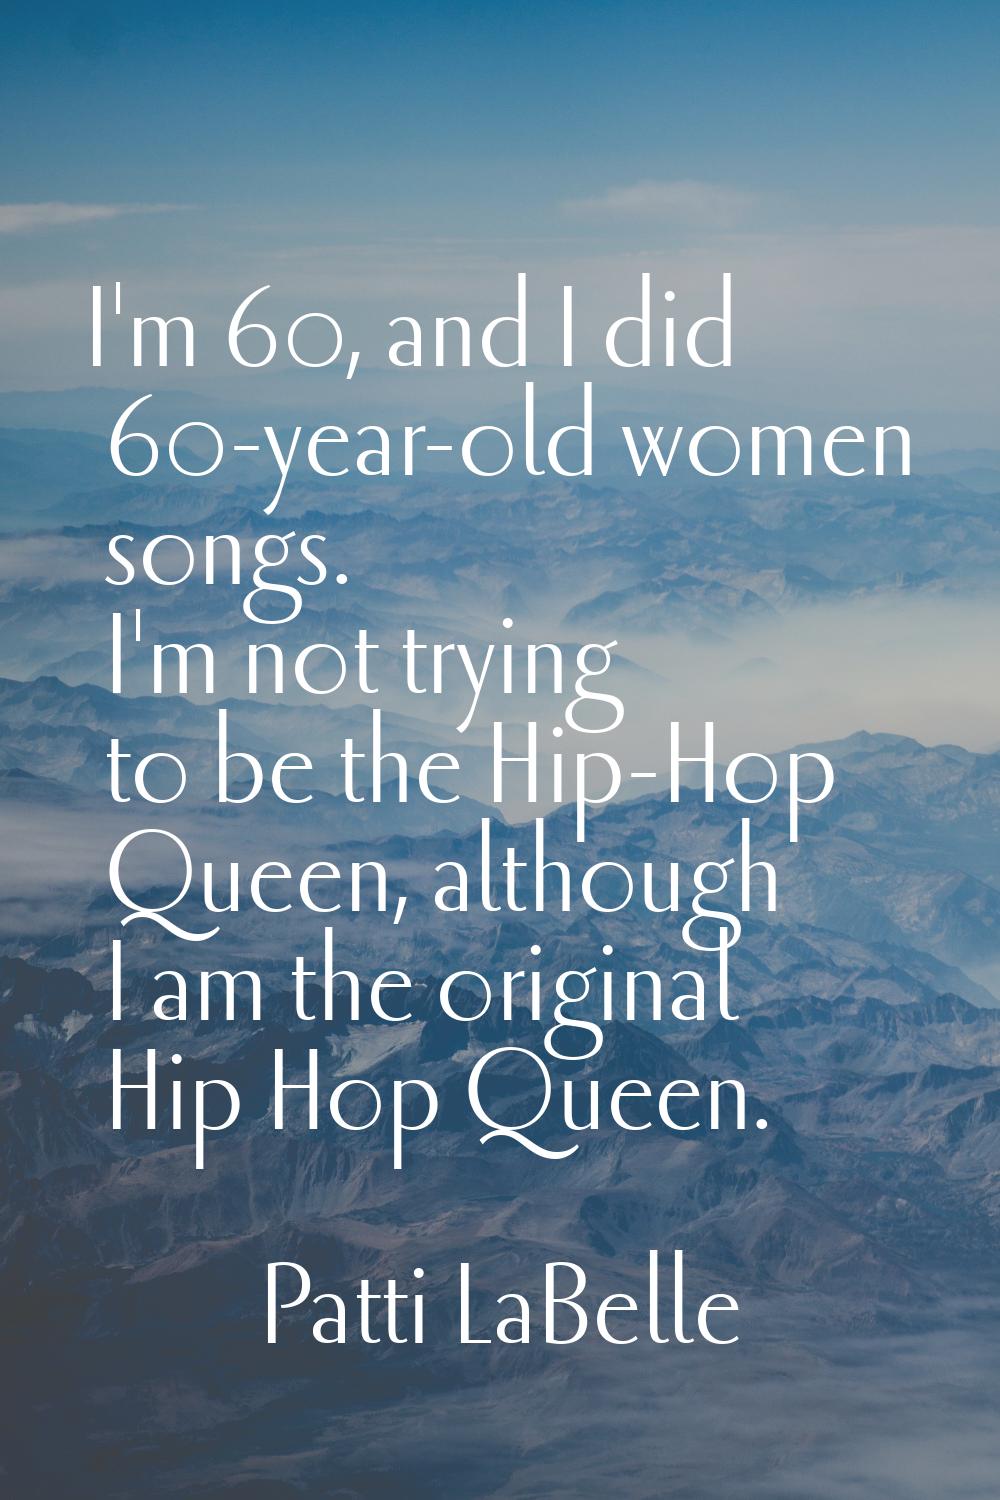 I'm 60, and I did 60-year-old women songs. I'm not trying to be the Hip-Hop Queen, although I am th